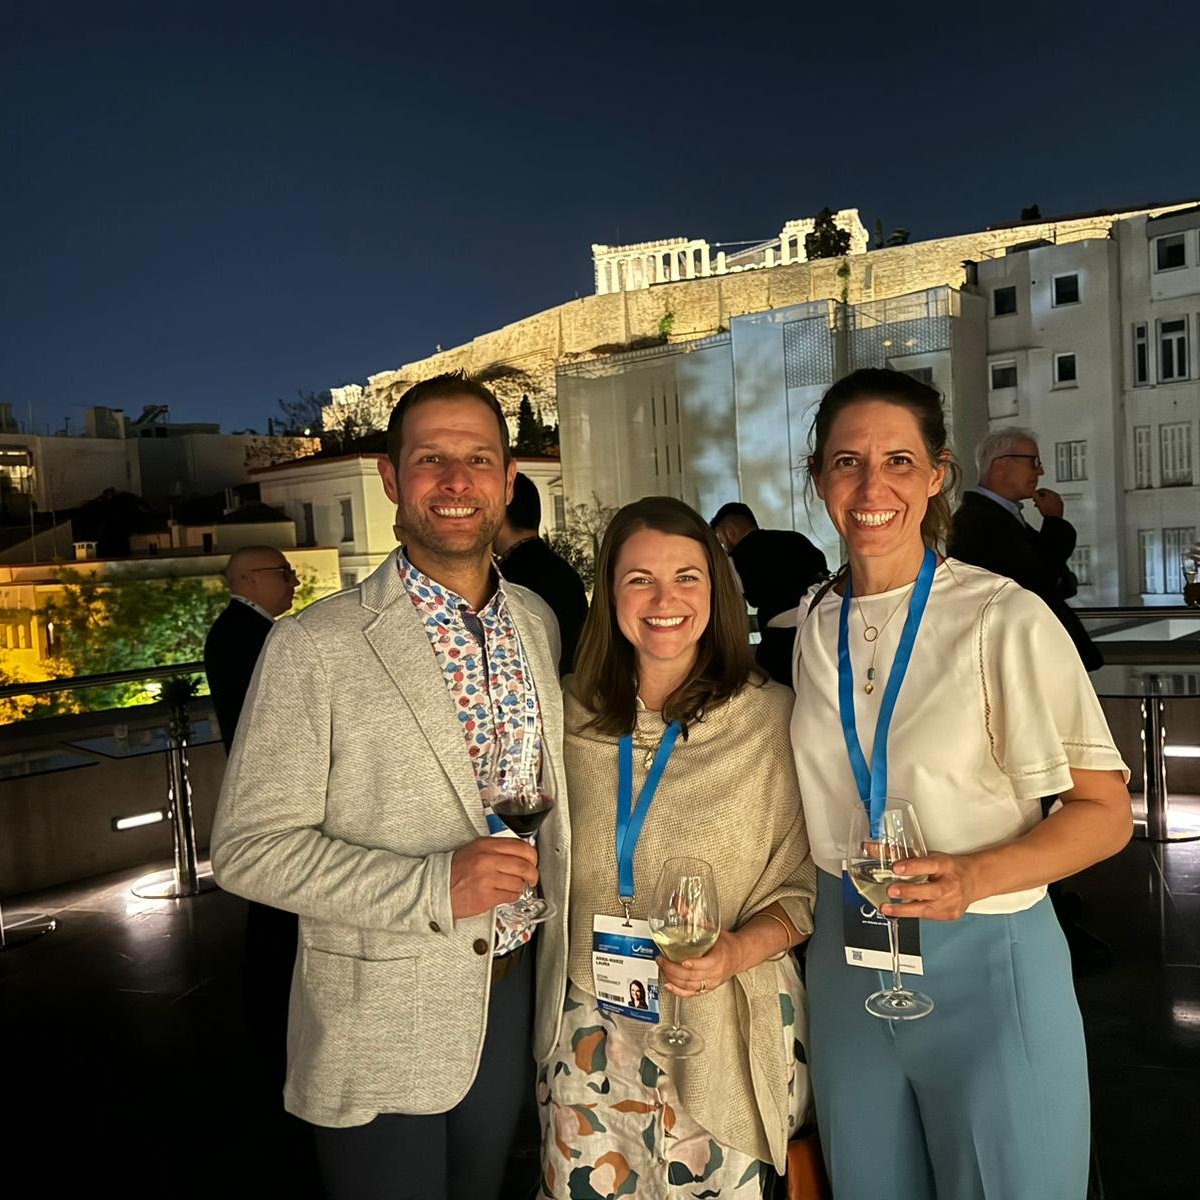 Extraordinary night discussing international ocean policy alongside @OurOcean colleagues past and present, in the shadows of democracy's birthplace. #OurOceanGreece